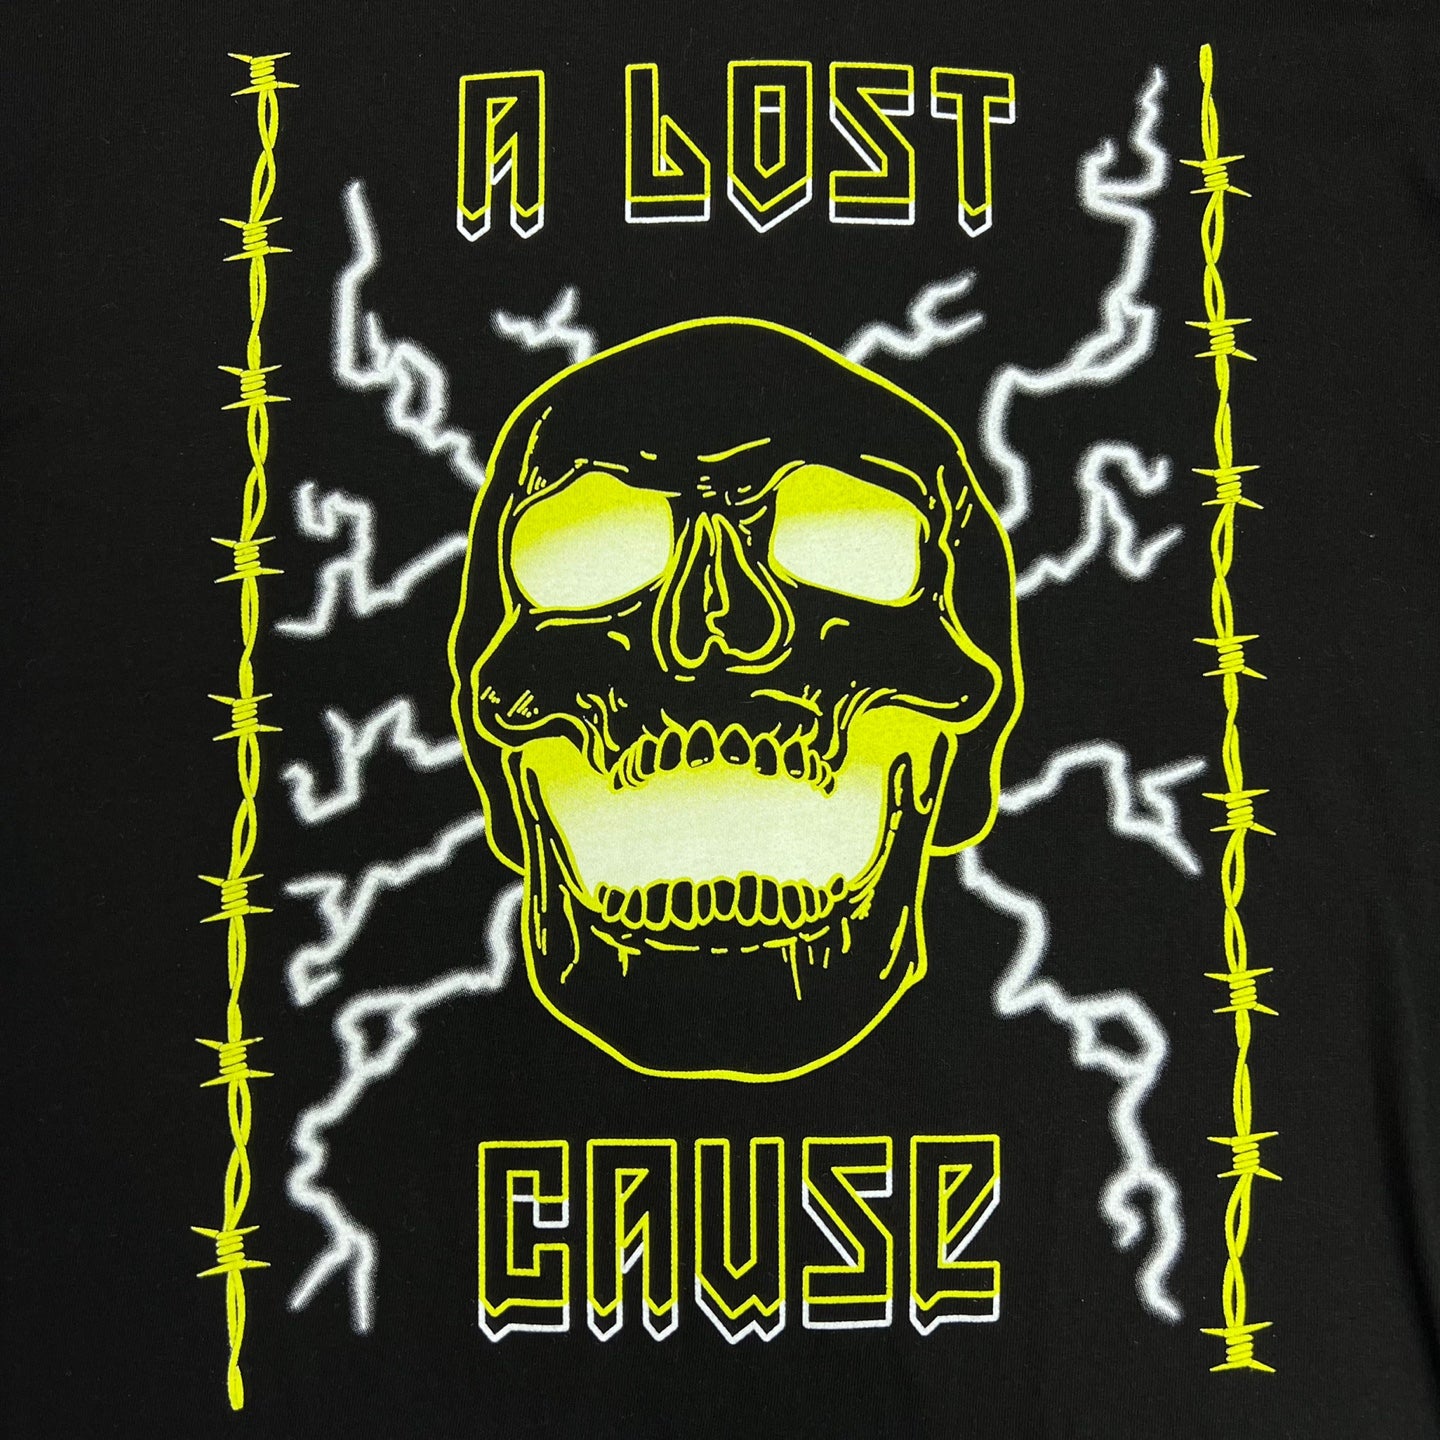 A LOST CAUSE Electric Skull T-Shirt